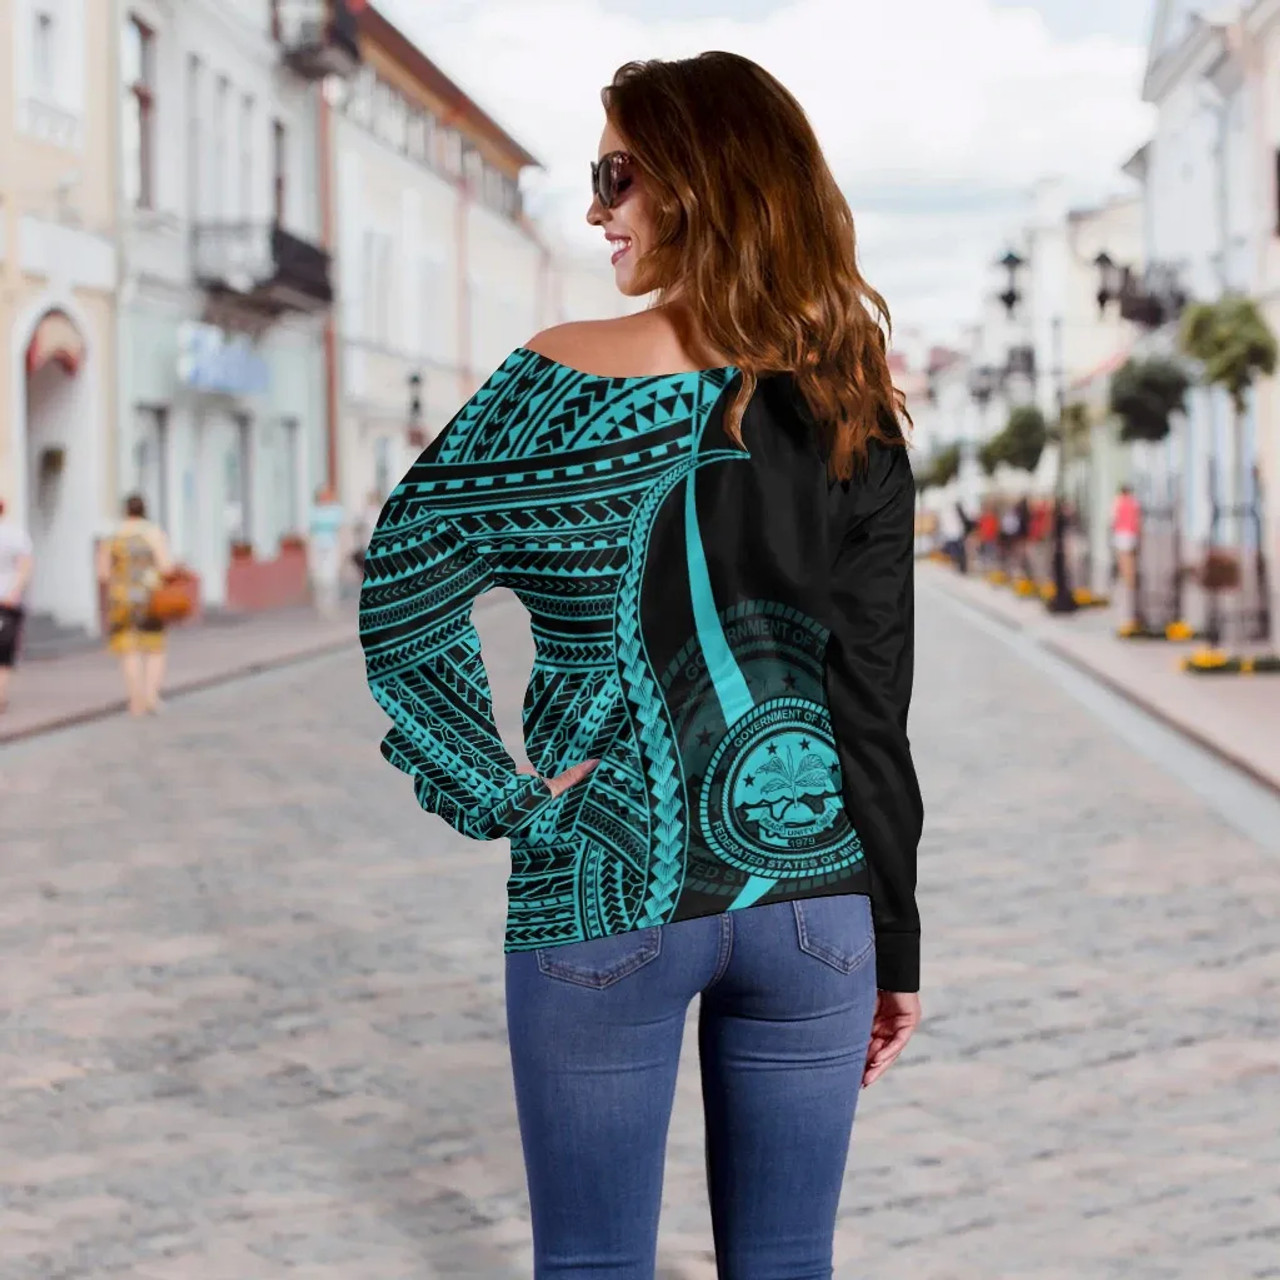 Federated States of Micronesia Custom Personalised Women Off Shoulder Sweater - Turquoise Polynesian Tentacle Tribal Pattern 4